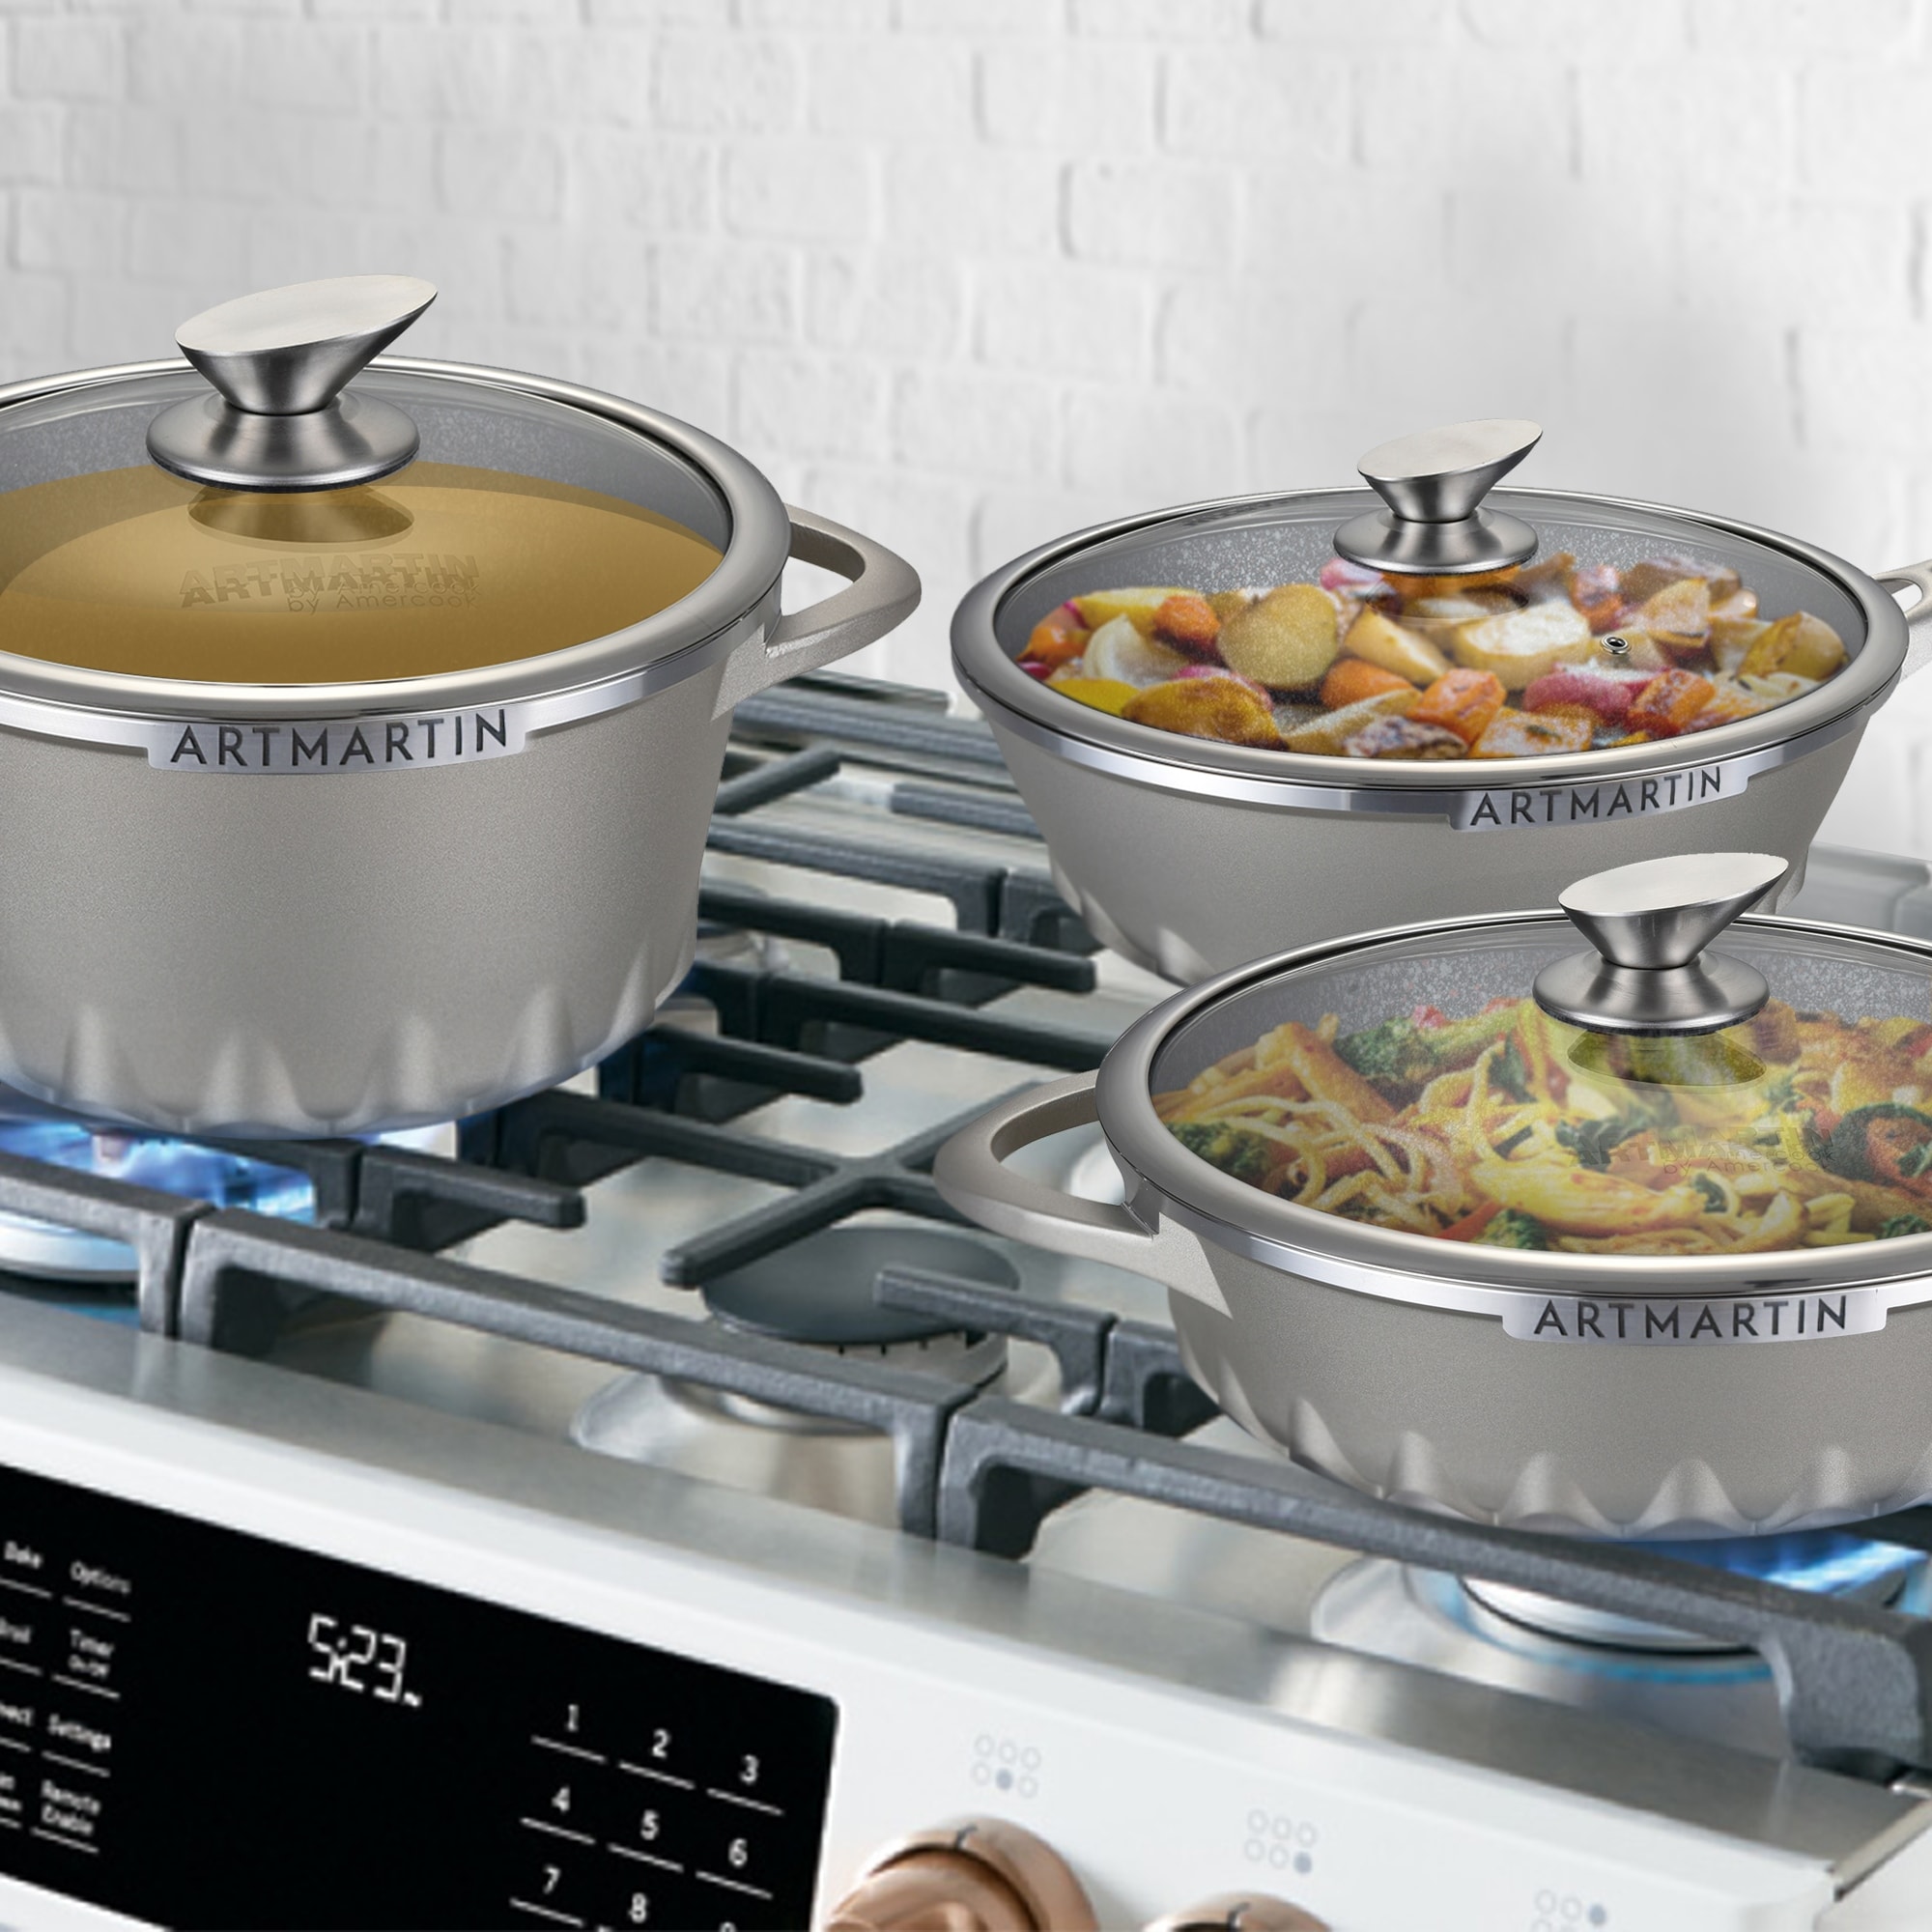 https://ak1.ostkcdn.com/images/products/is/images/direct/4b2aab9a1c8a30c589151b52ac53ef7ae651995e/Non-Stick-Ceramic-Coated-Die-Cast-Aluminum-Round-Casserole-%26-Lid-with-Induction-Bottom-%E2%80%93-8.7-inch.jpg